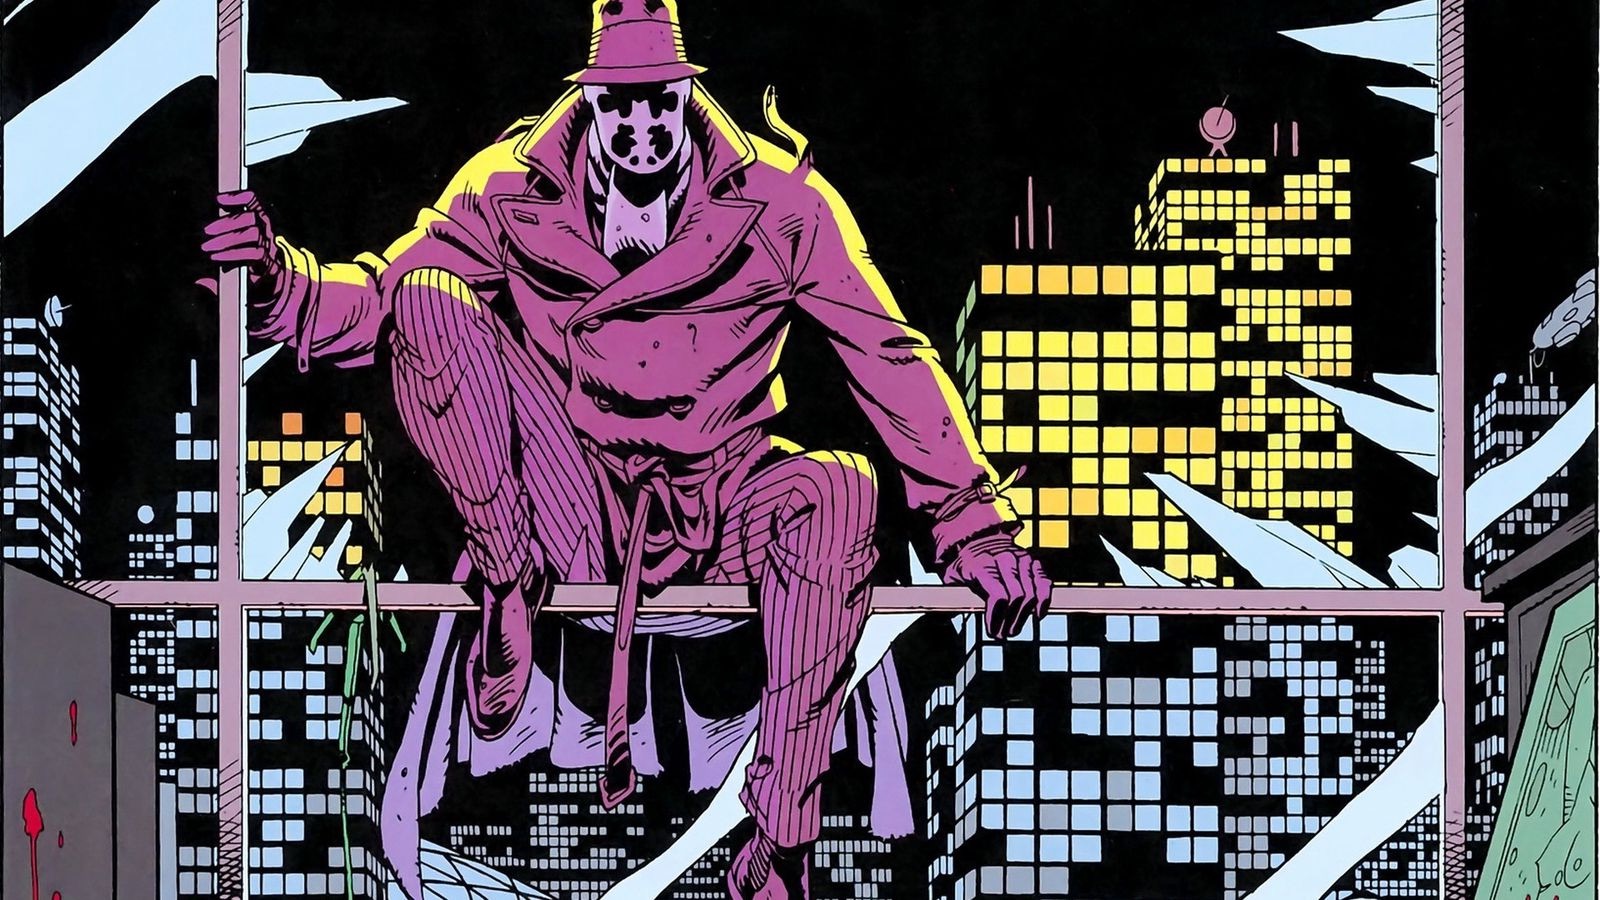 Rorschach's first appearance in Alan Moore and Dave Gibbons's Watchmen comic book series